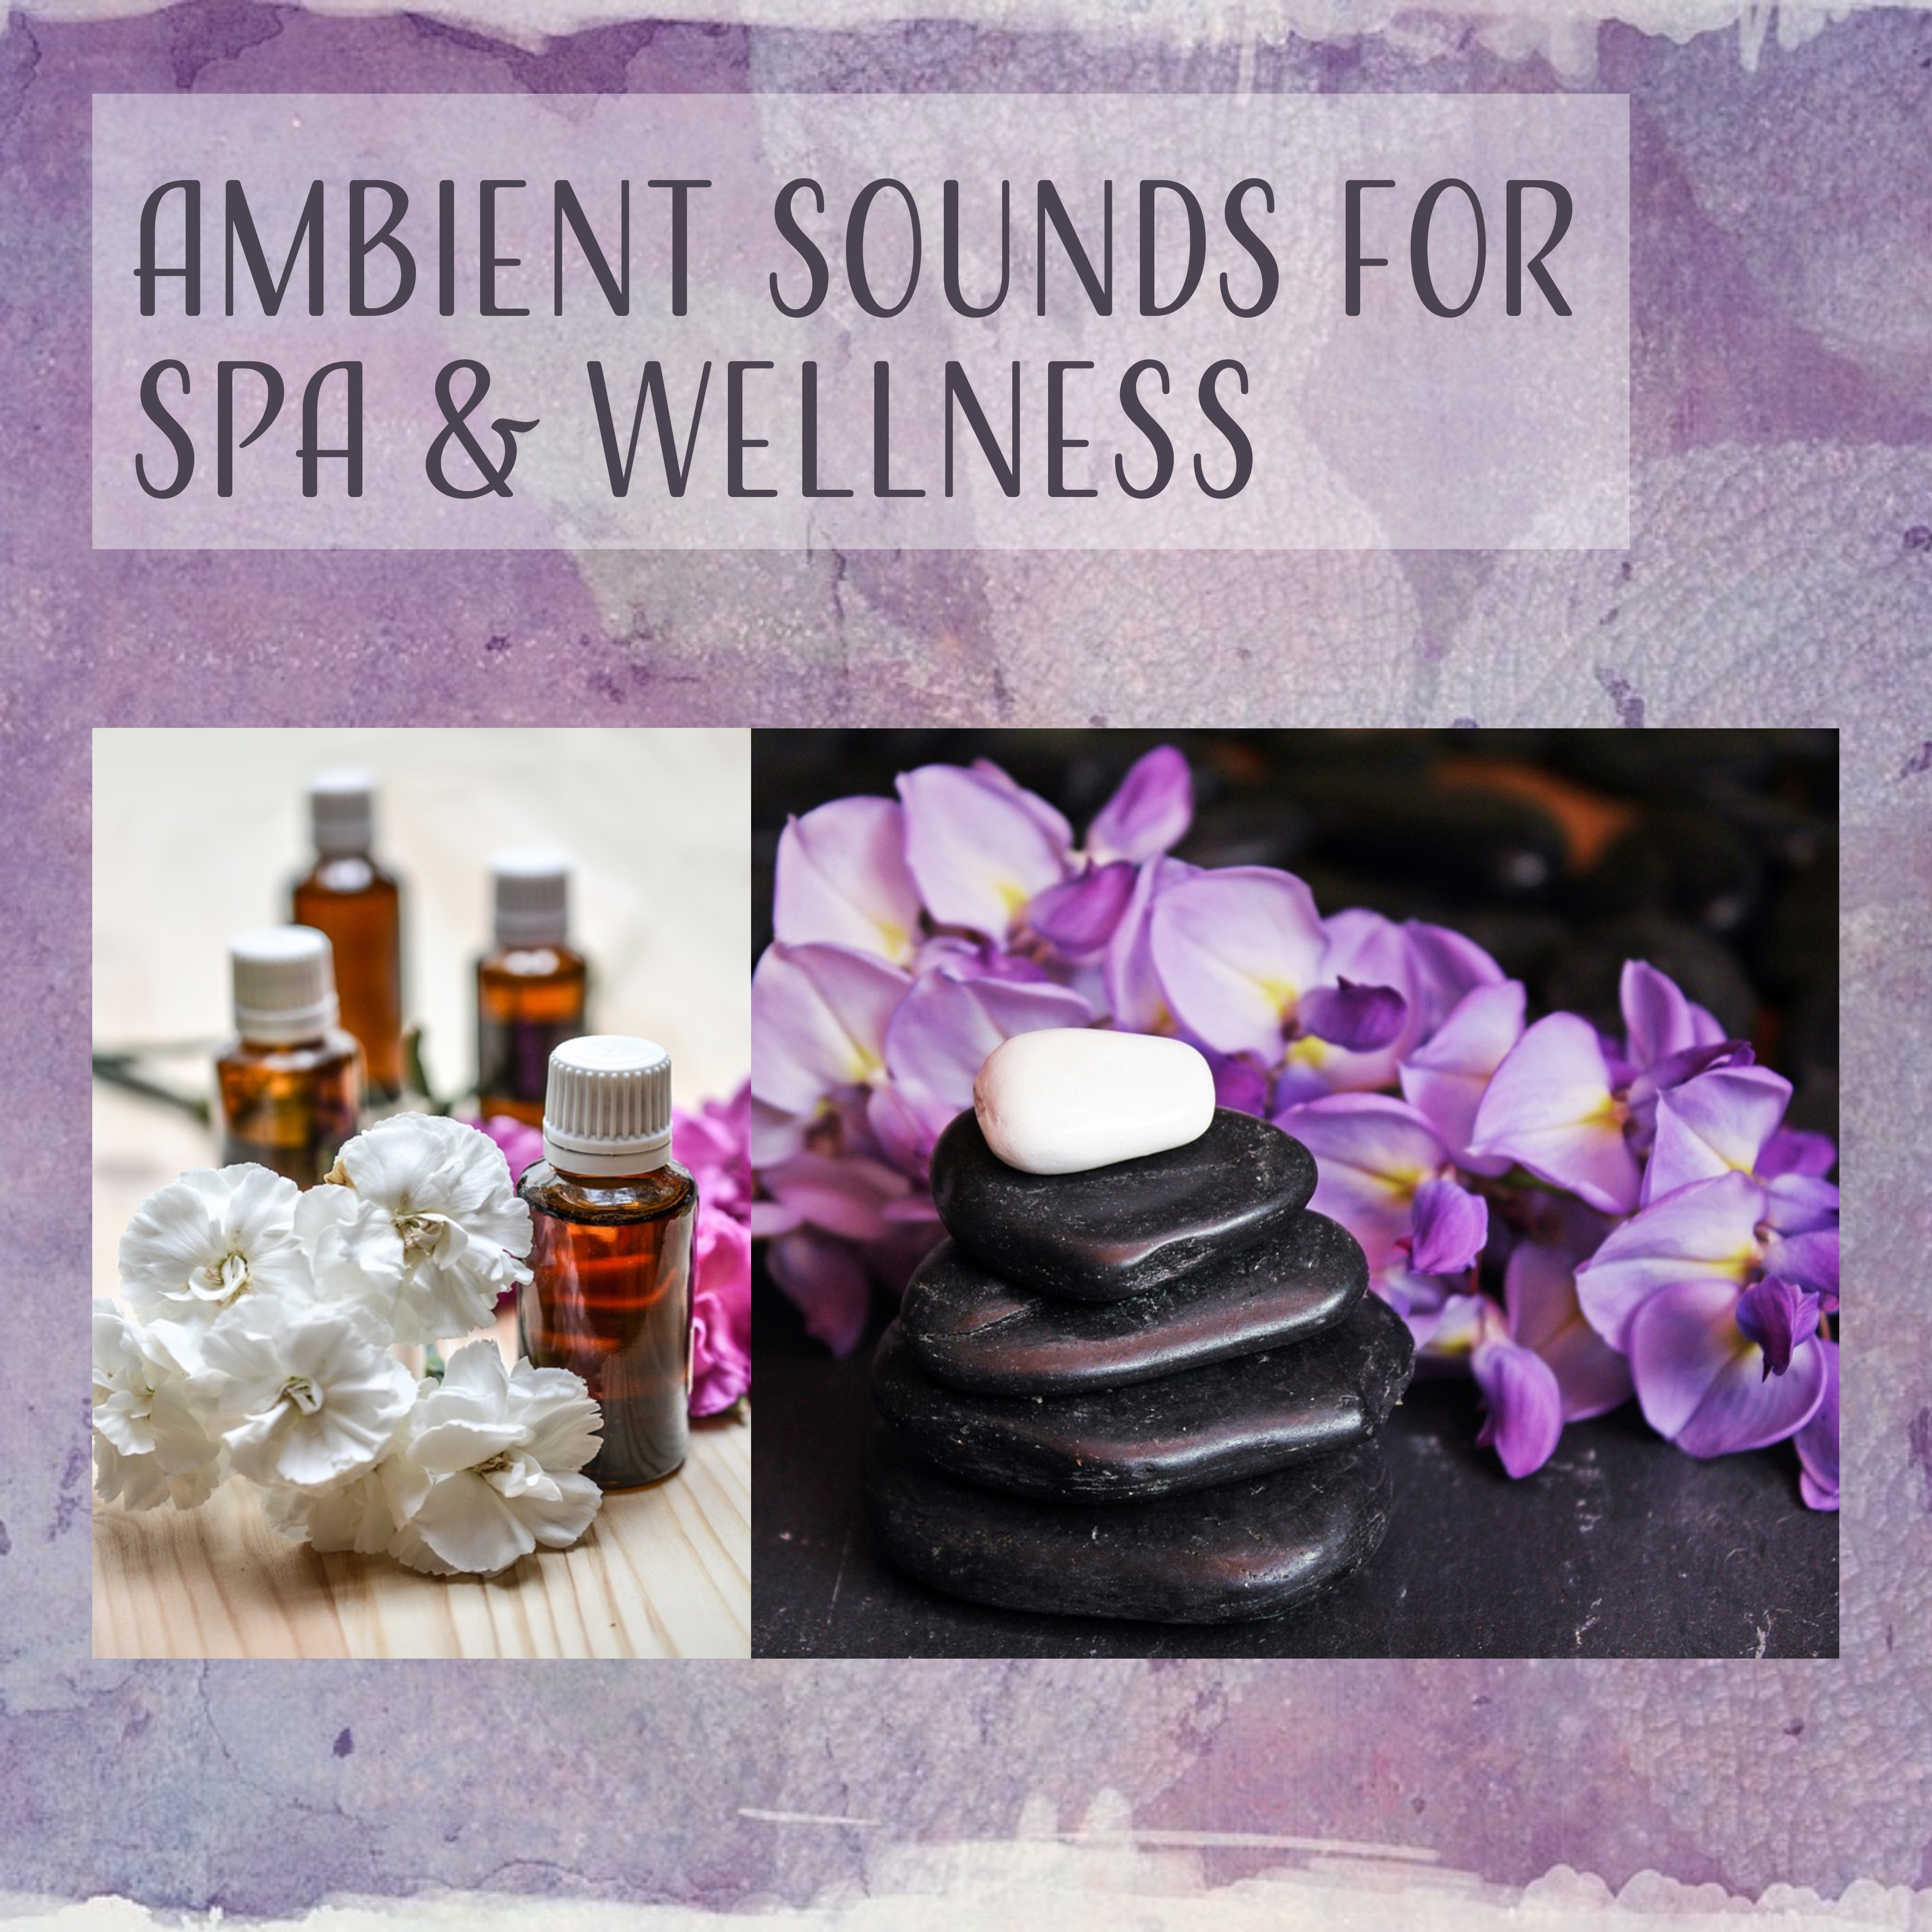 Ambient Sounds for Spa & Wellness – Best Ambient New Age Music, Spa Relaxation, Beautiful Time in Wellness, Calm Music